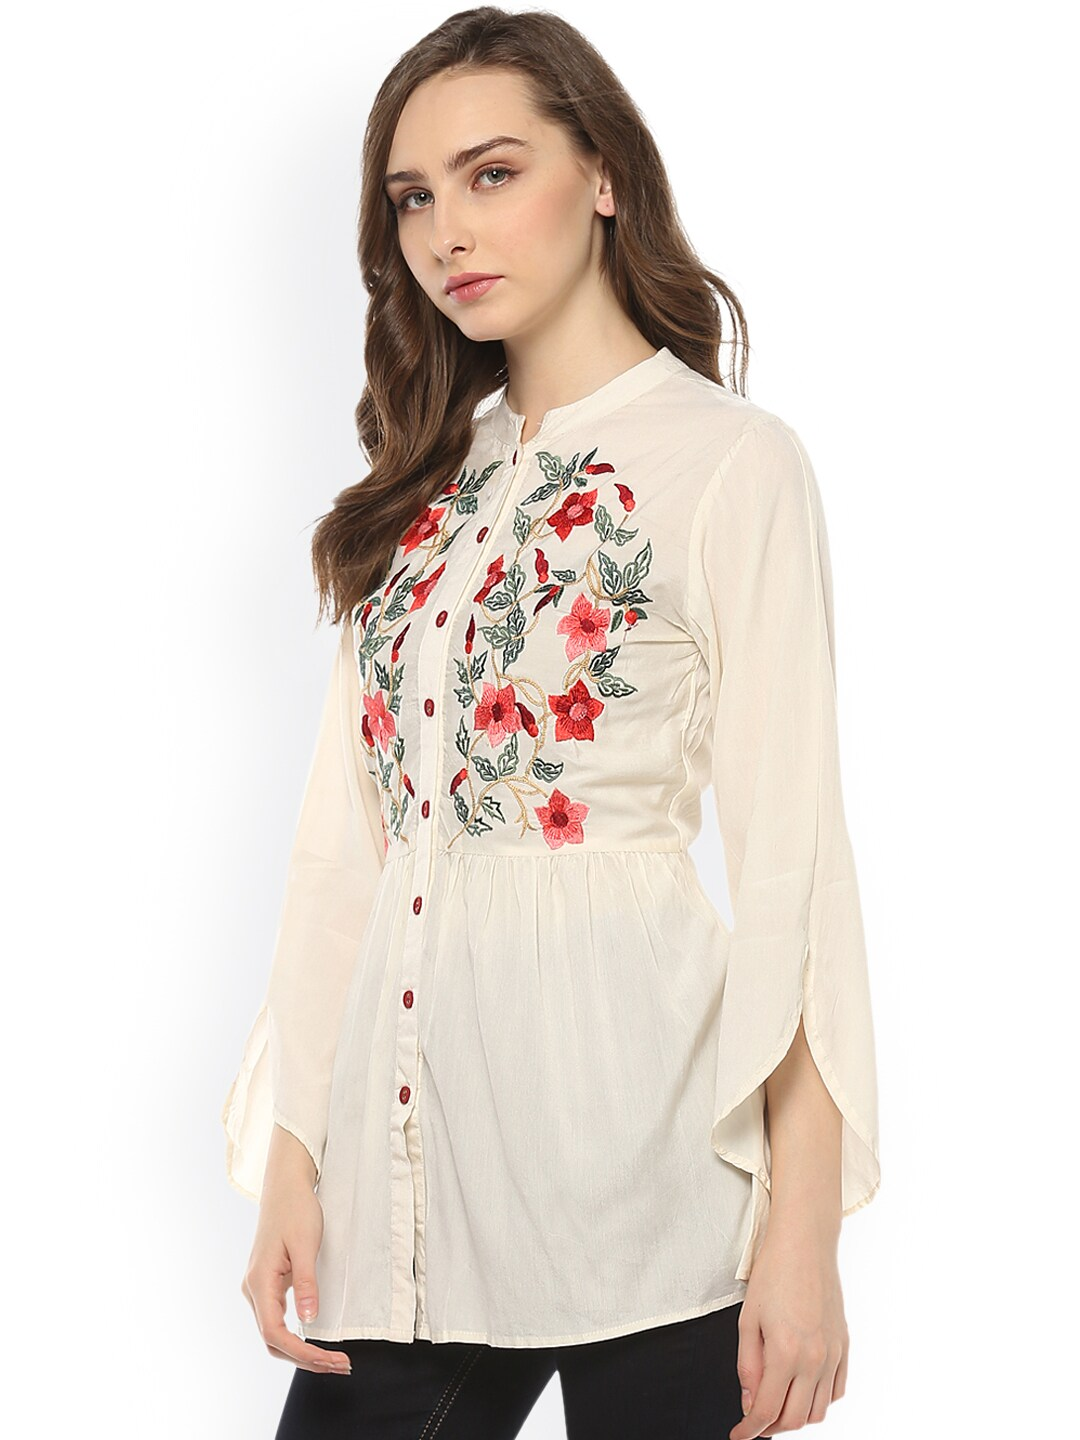 Women's  Off-White Embroidered Top - Wahe-NOOR